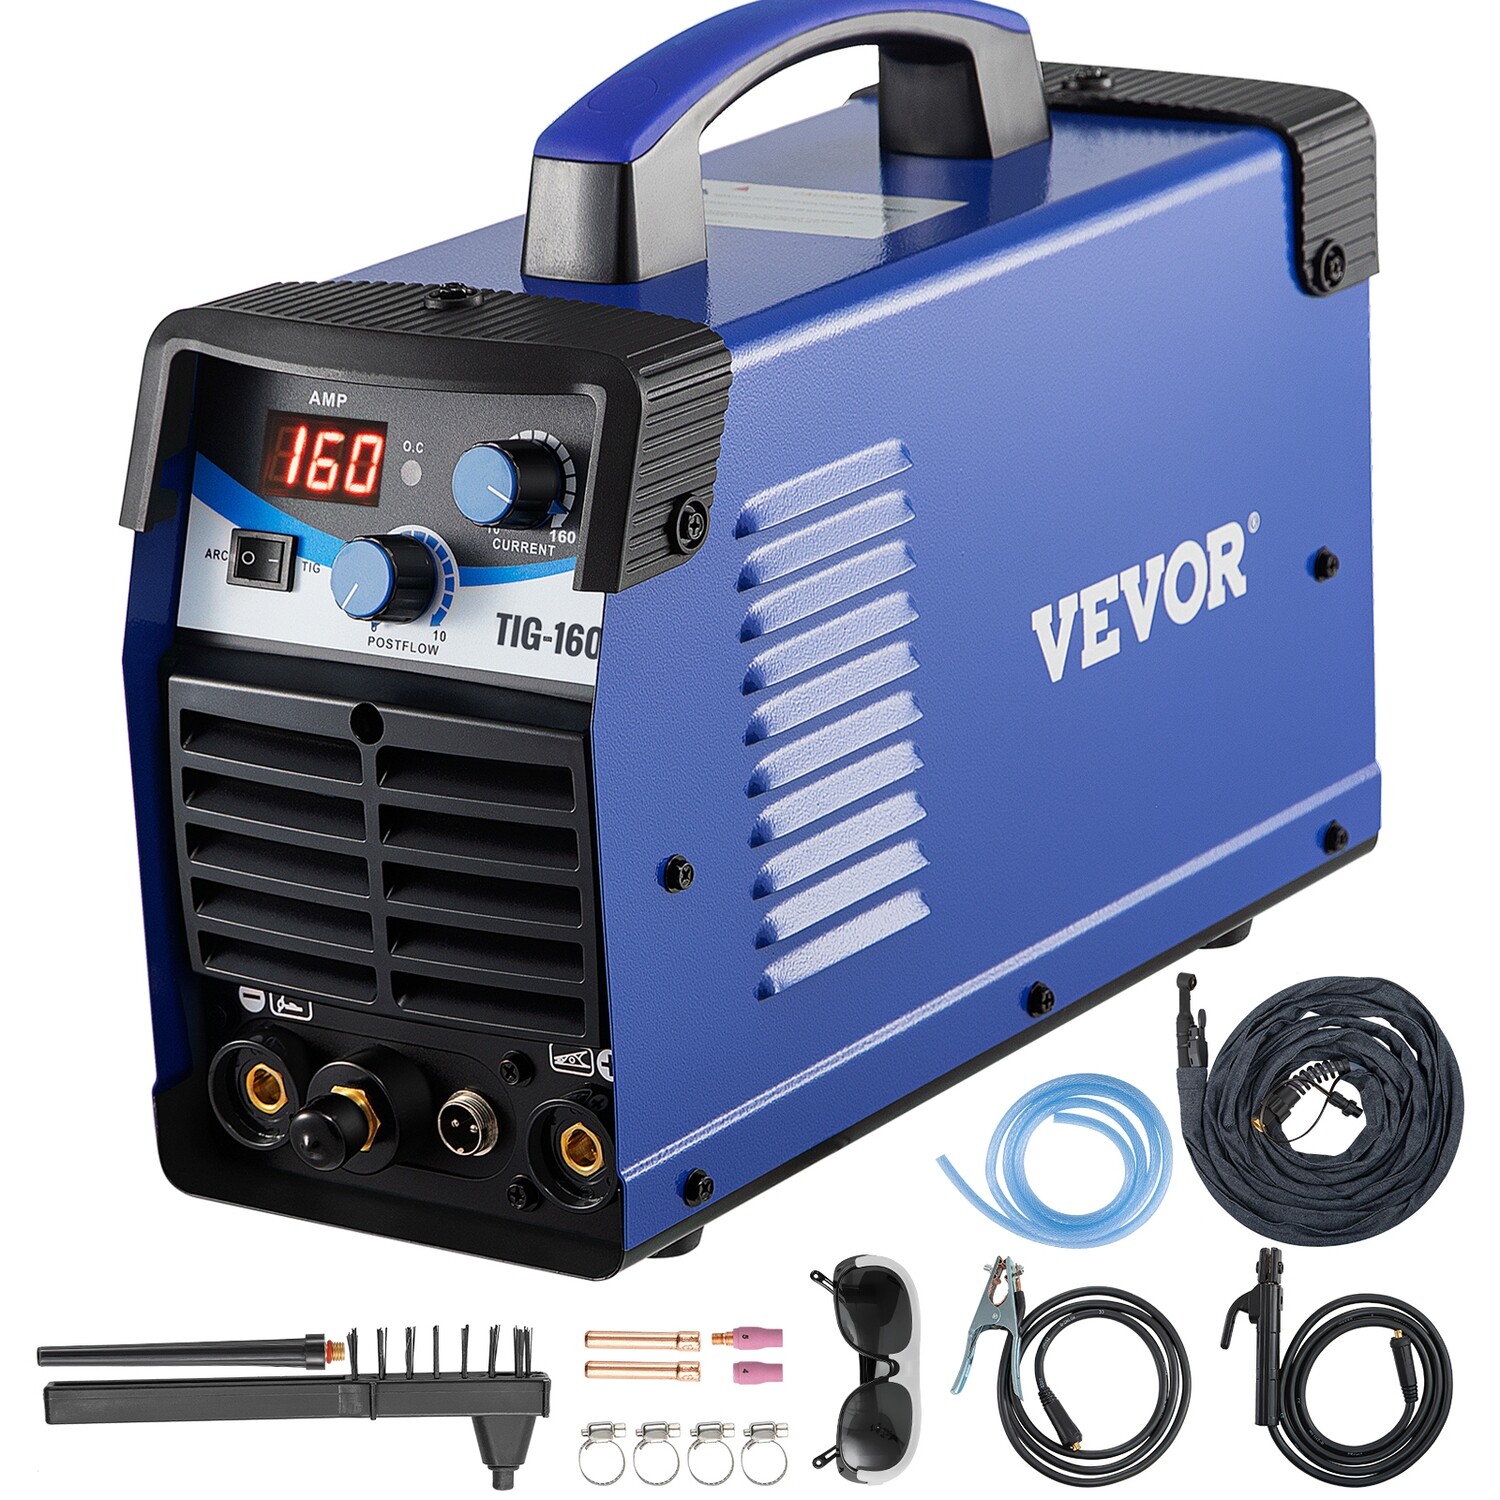 Accessories for the 160Amp TIG/ARC 2-in-1 Inverter Welder with HF ARC Start